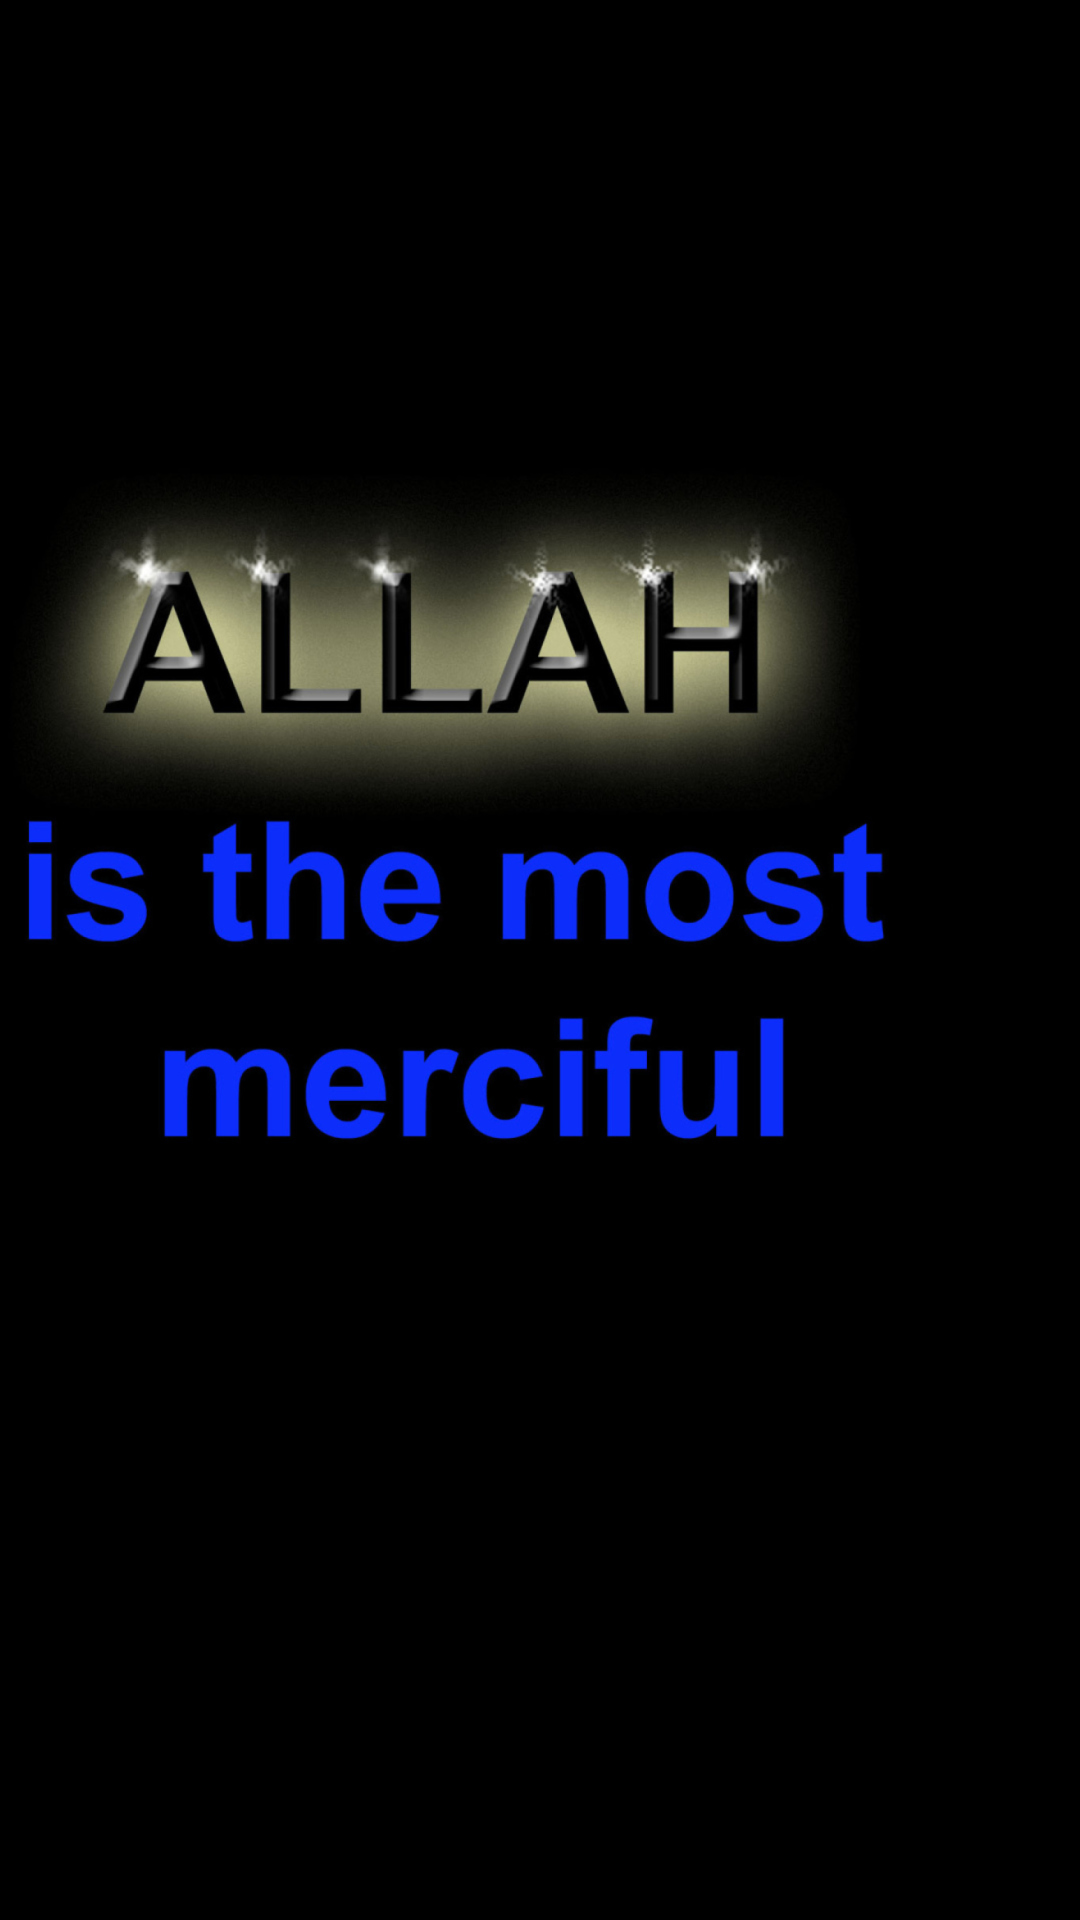 Allah Is The Most Merciful screenshot #1 1080x1920